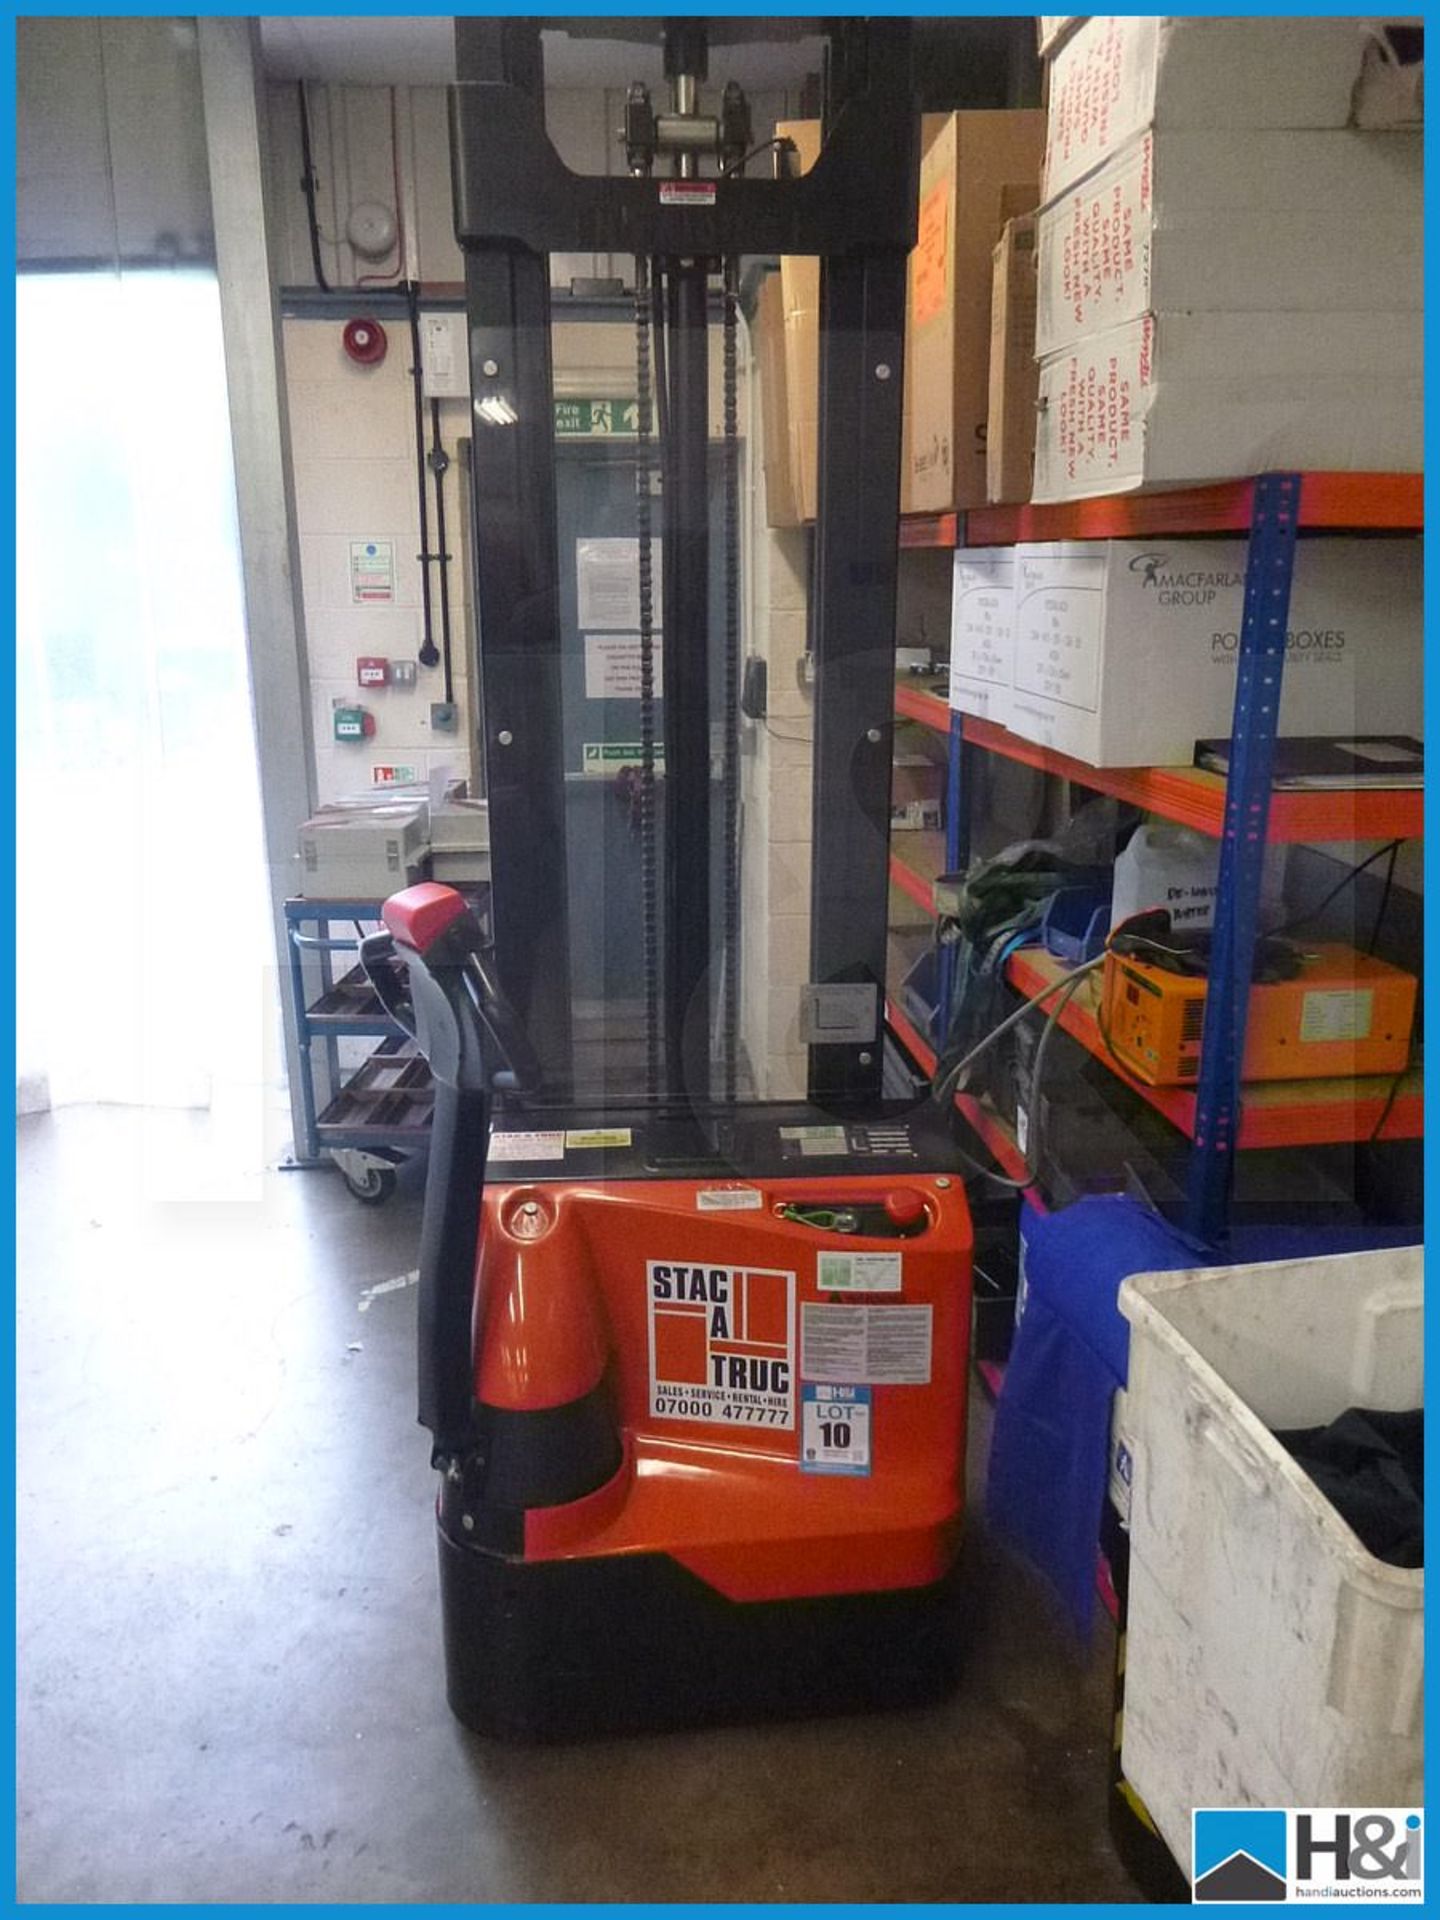 STAK-A-TRUC ES12 12WA, PEDESTRIAN ELECTRIC FORKLIFT TRUCK, 93 HOURS ONLY, SERIAL NUMBER 324200546, - Image 7 of 7